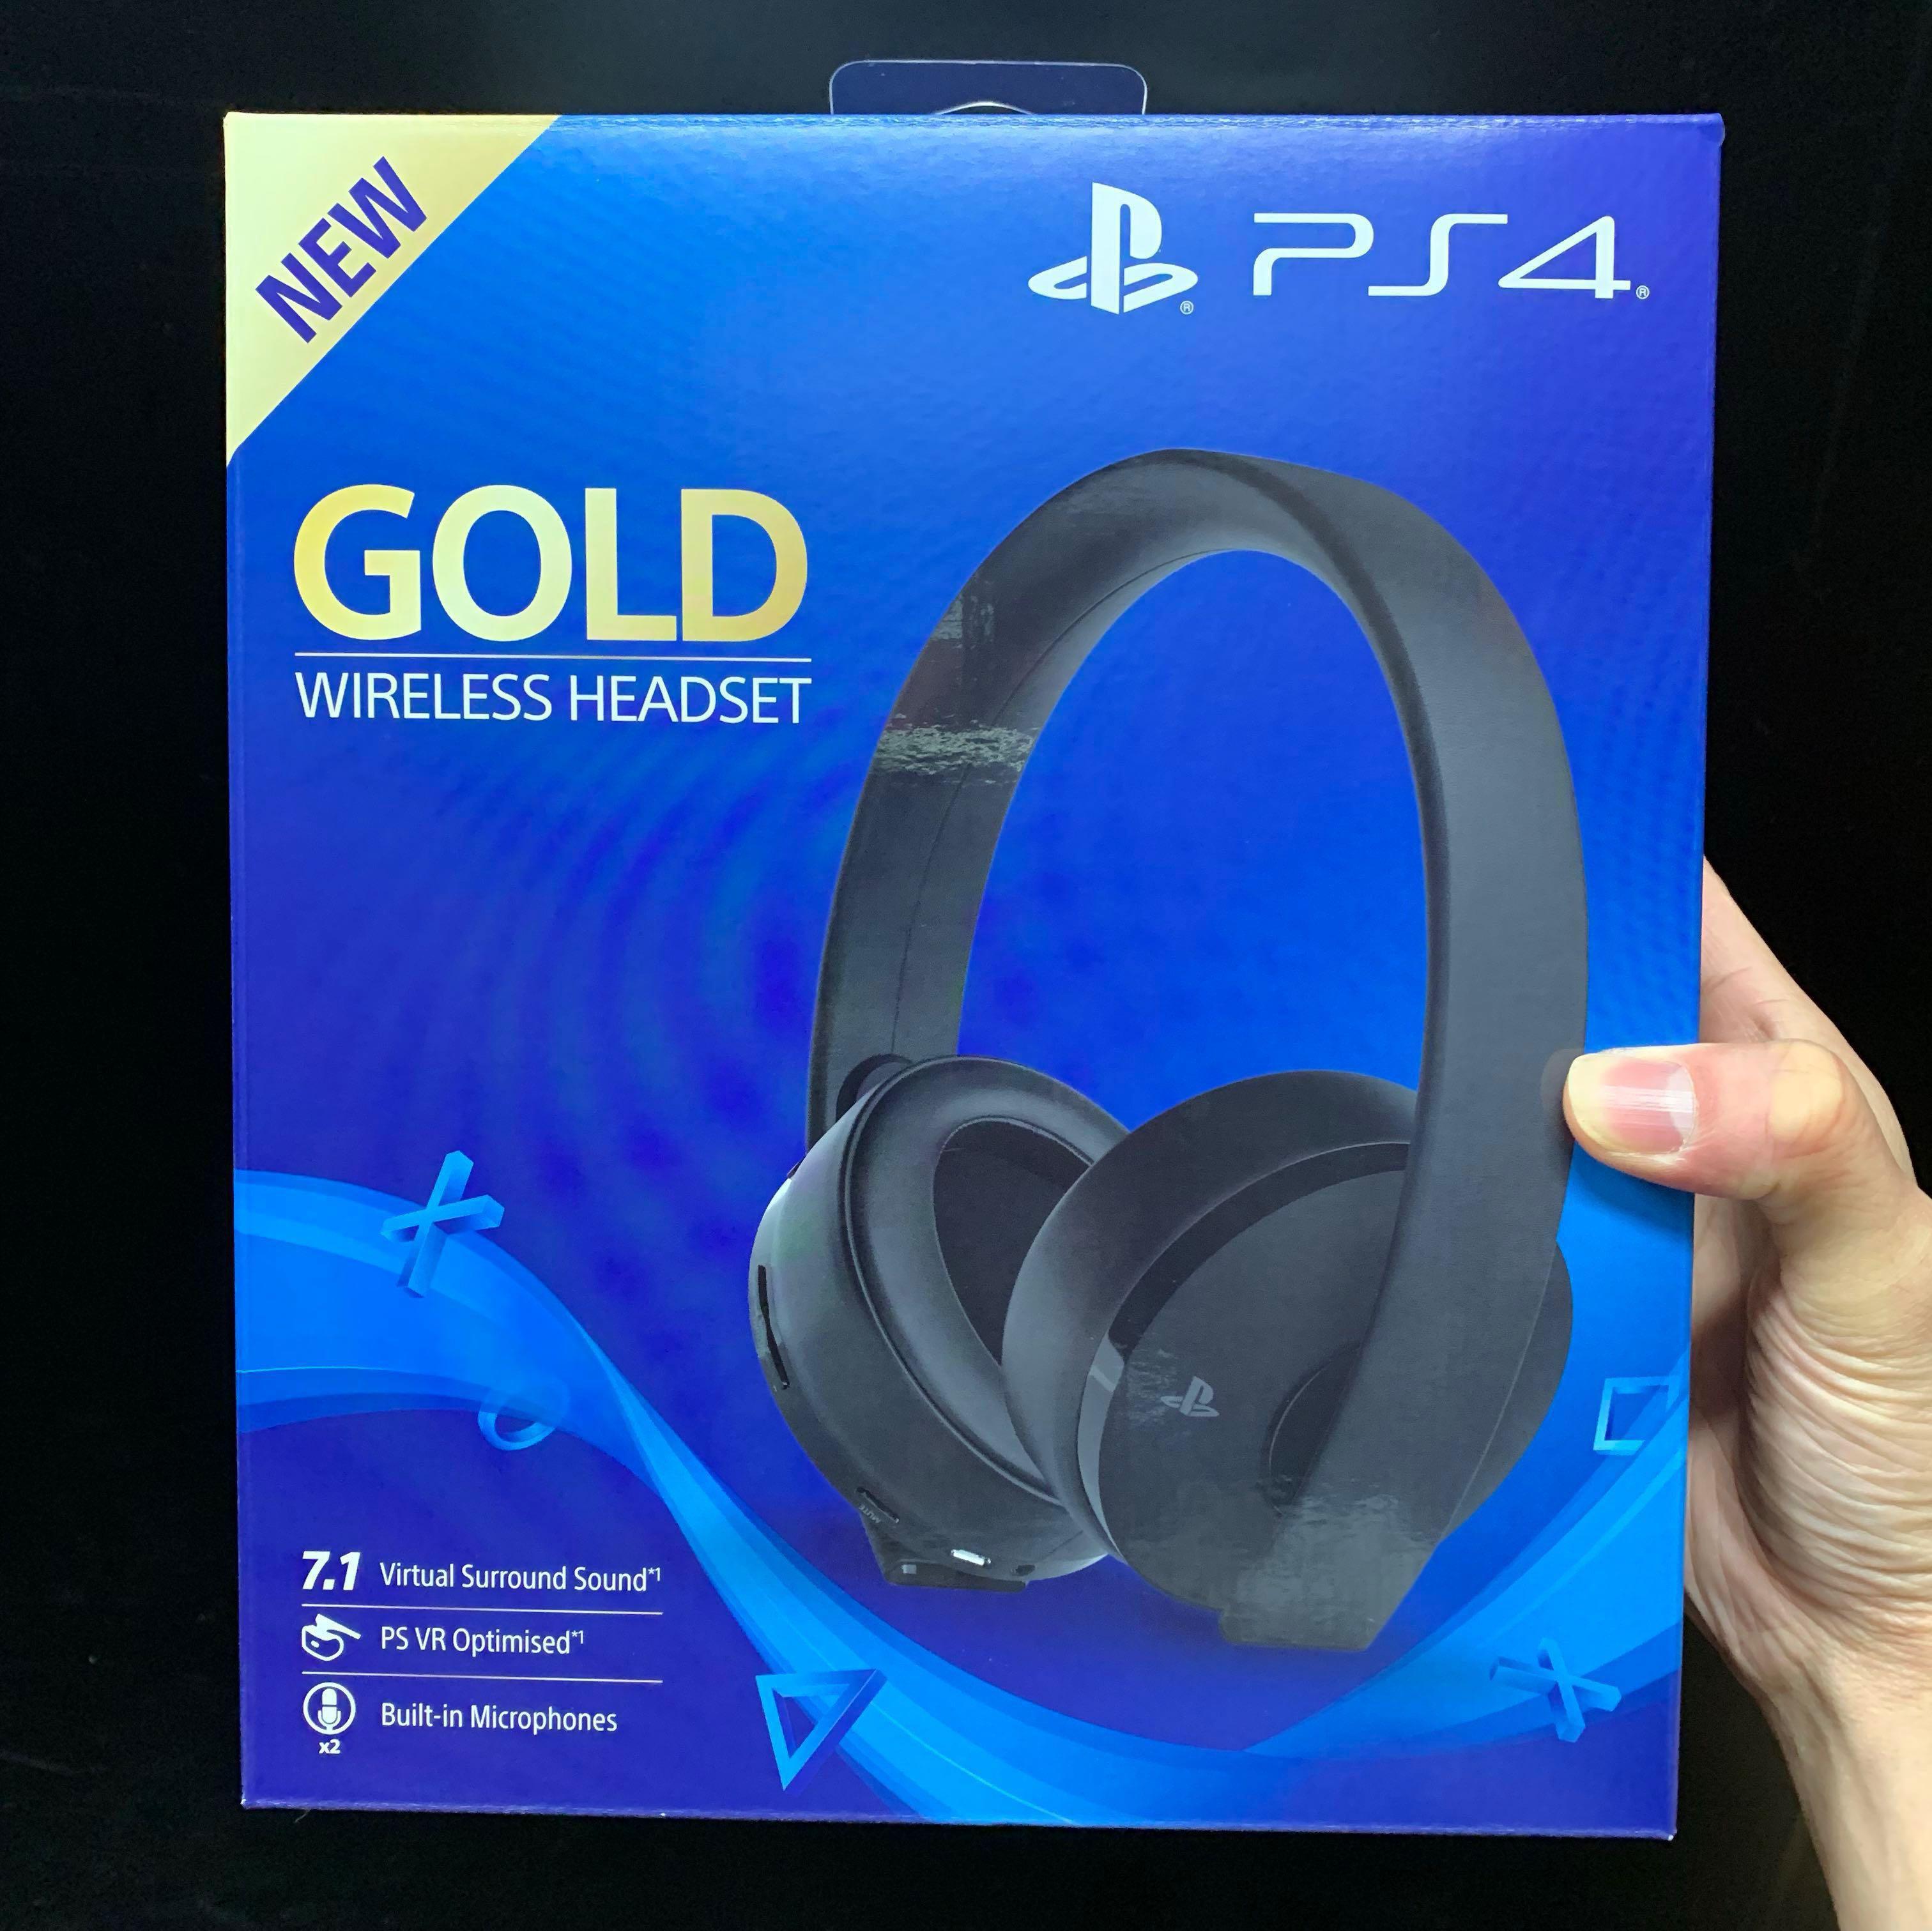 ps4 headset in box